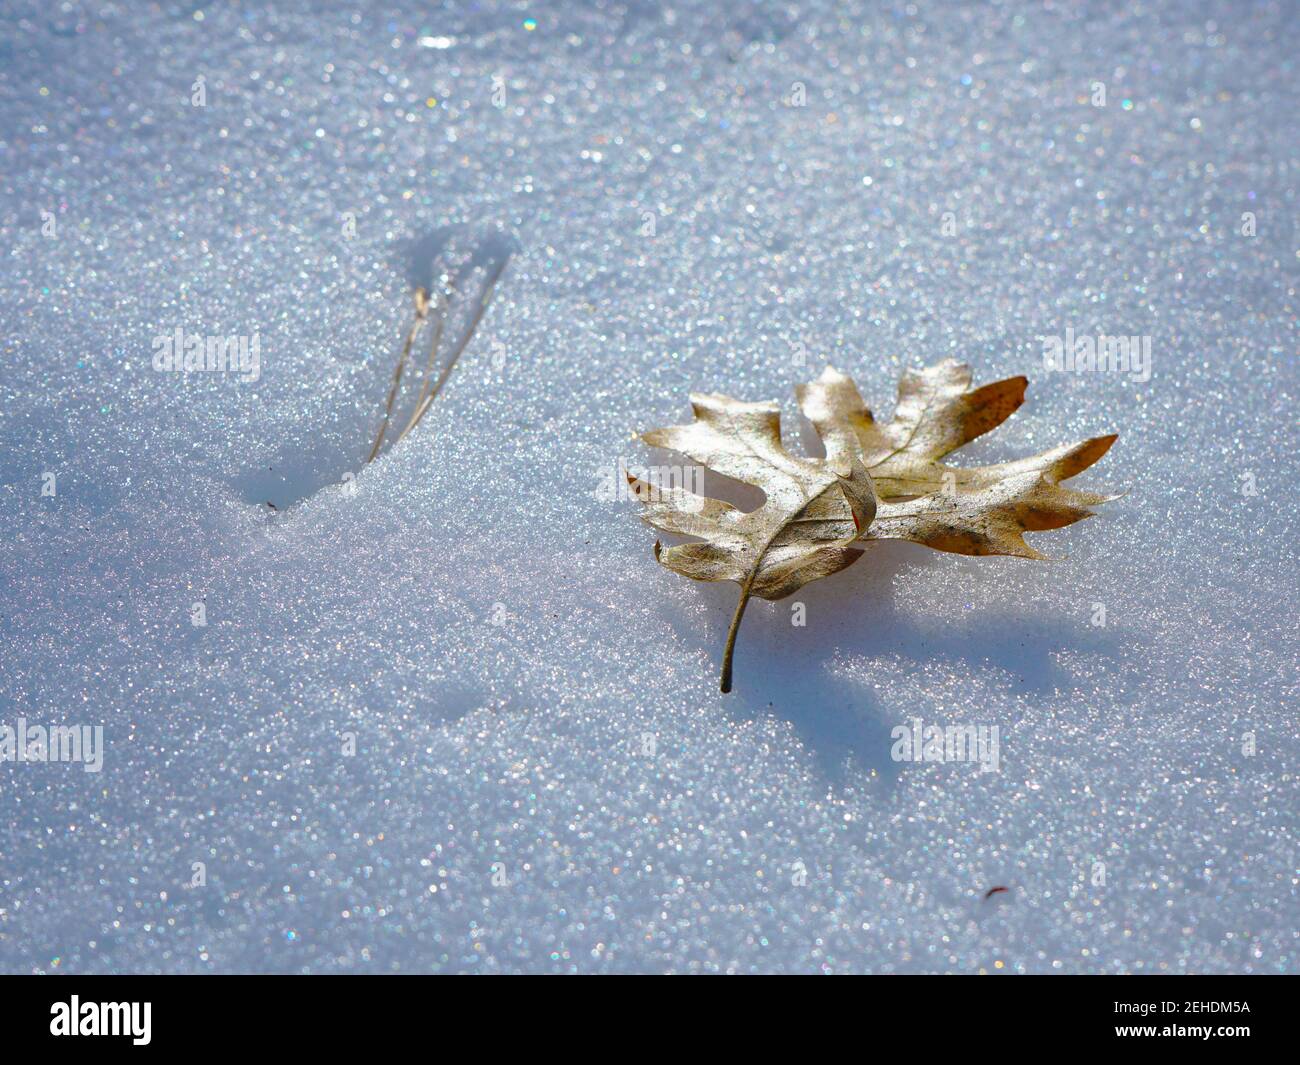 Low Angle View of Fallen oak leaf and pine needle on snow Stock Photo